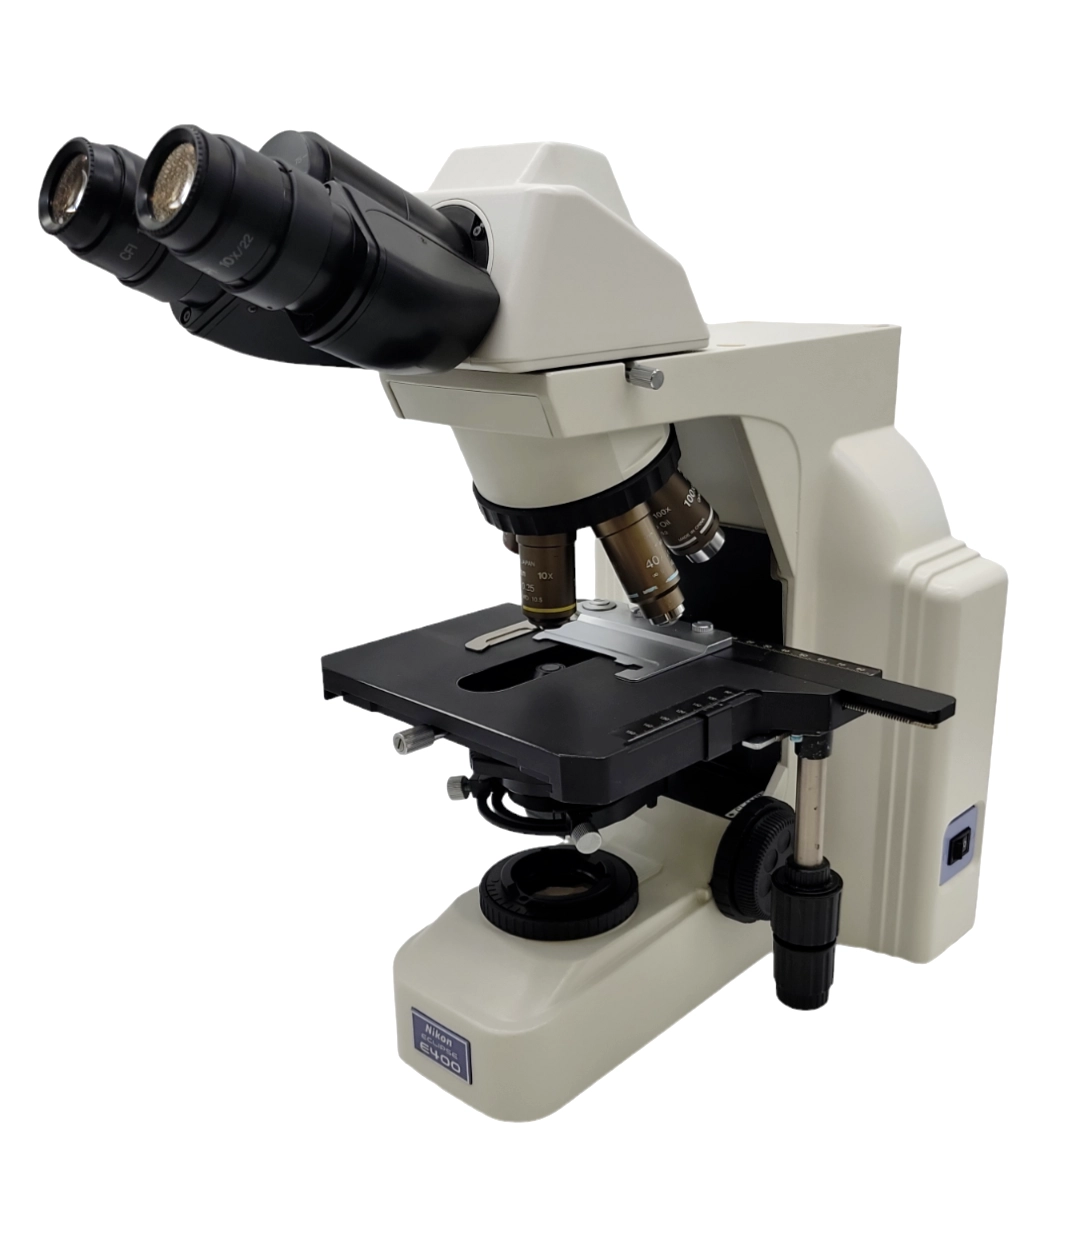 Nikon Microscope Eclipse E400 with LED Upgrade and 100x Objective